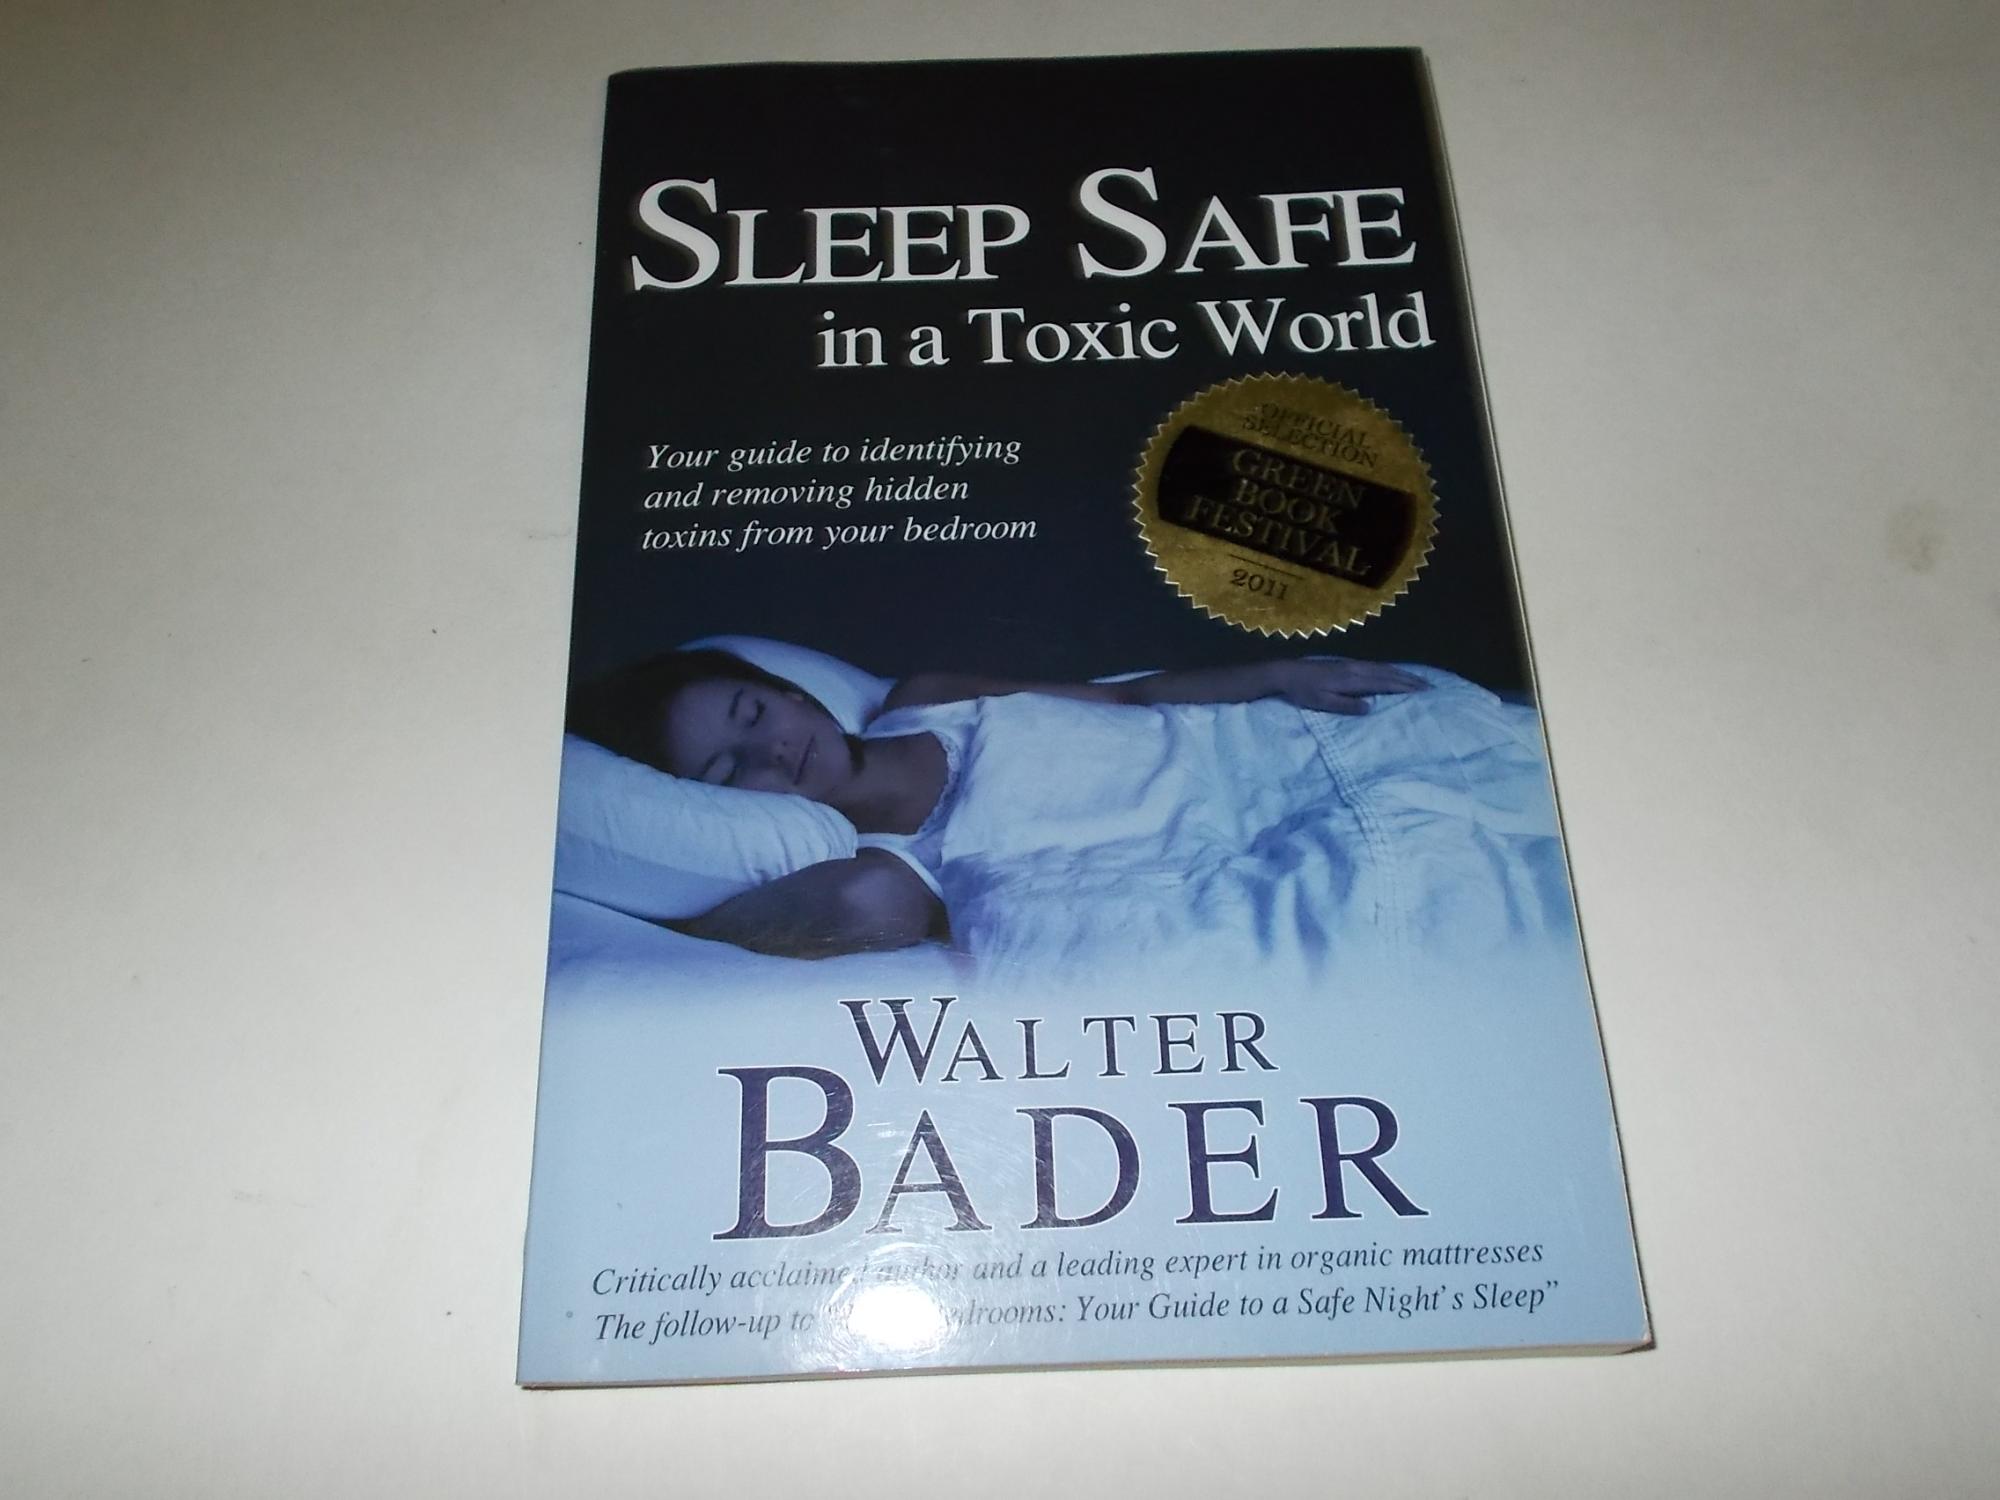 Sleep Safe in a Toxic World: Your Guide to Identifying and Removing Hidden Toxins from Your Bedroom - Walter Bader